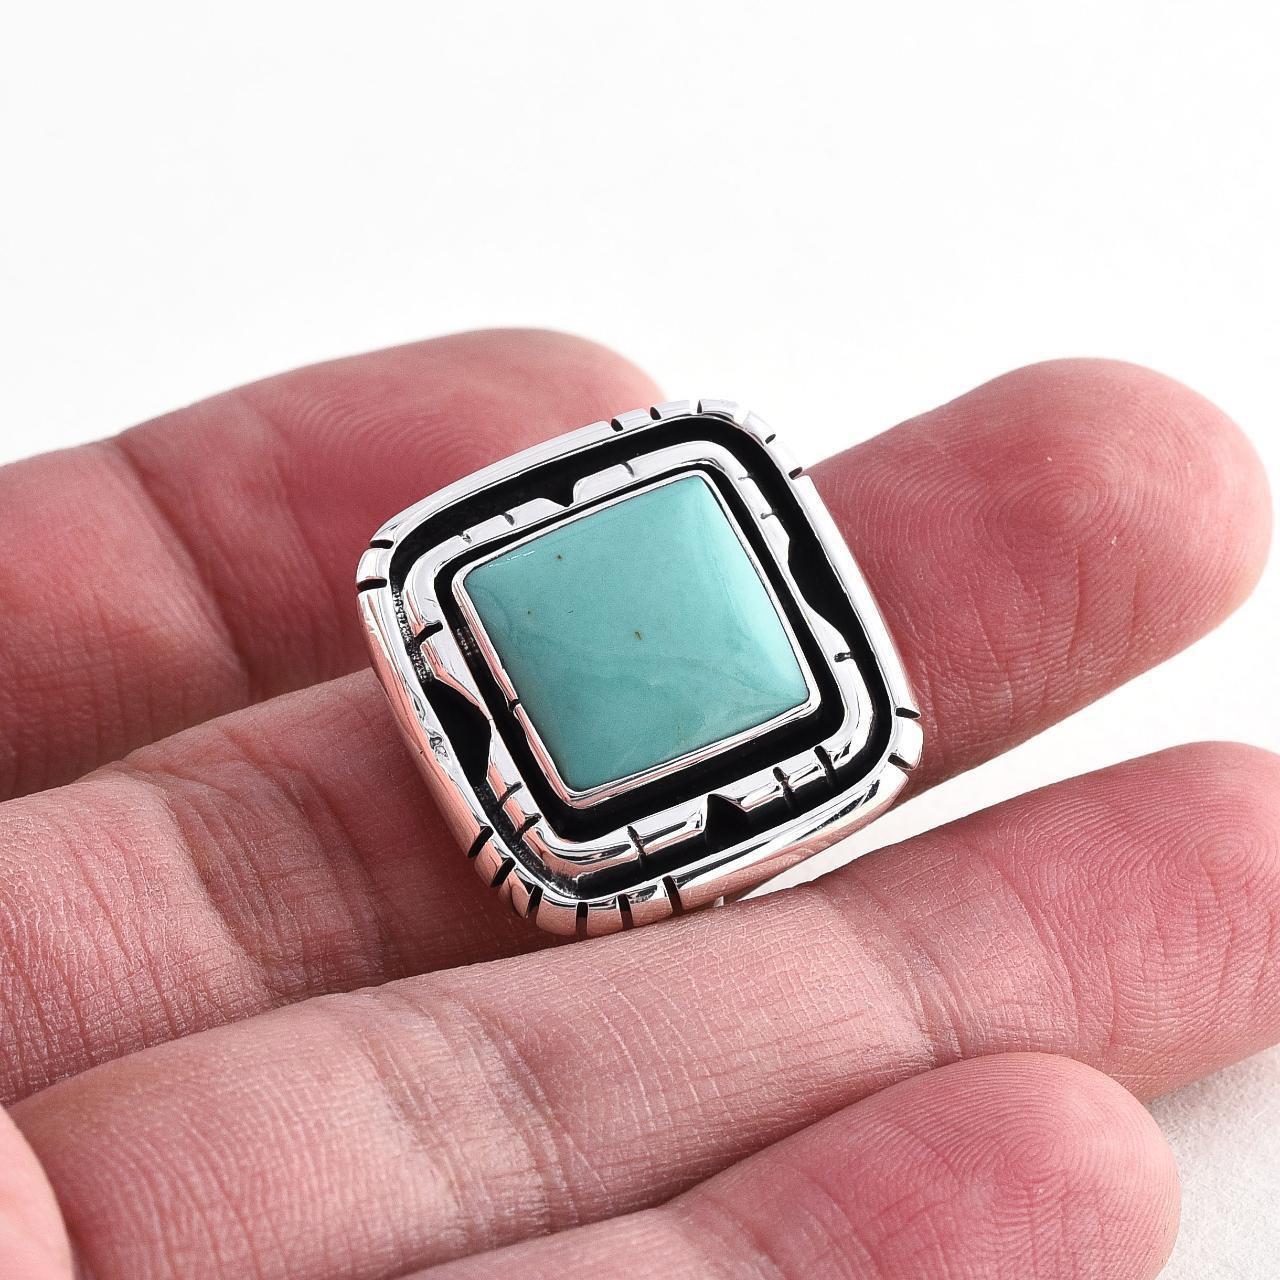 Product Image 4 - Sterling 925 Large Turquoise Ring

Sterling